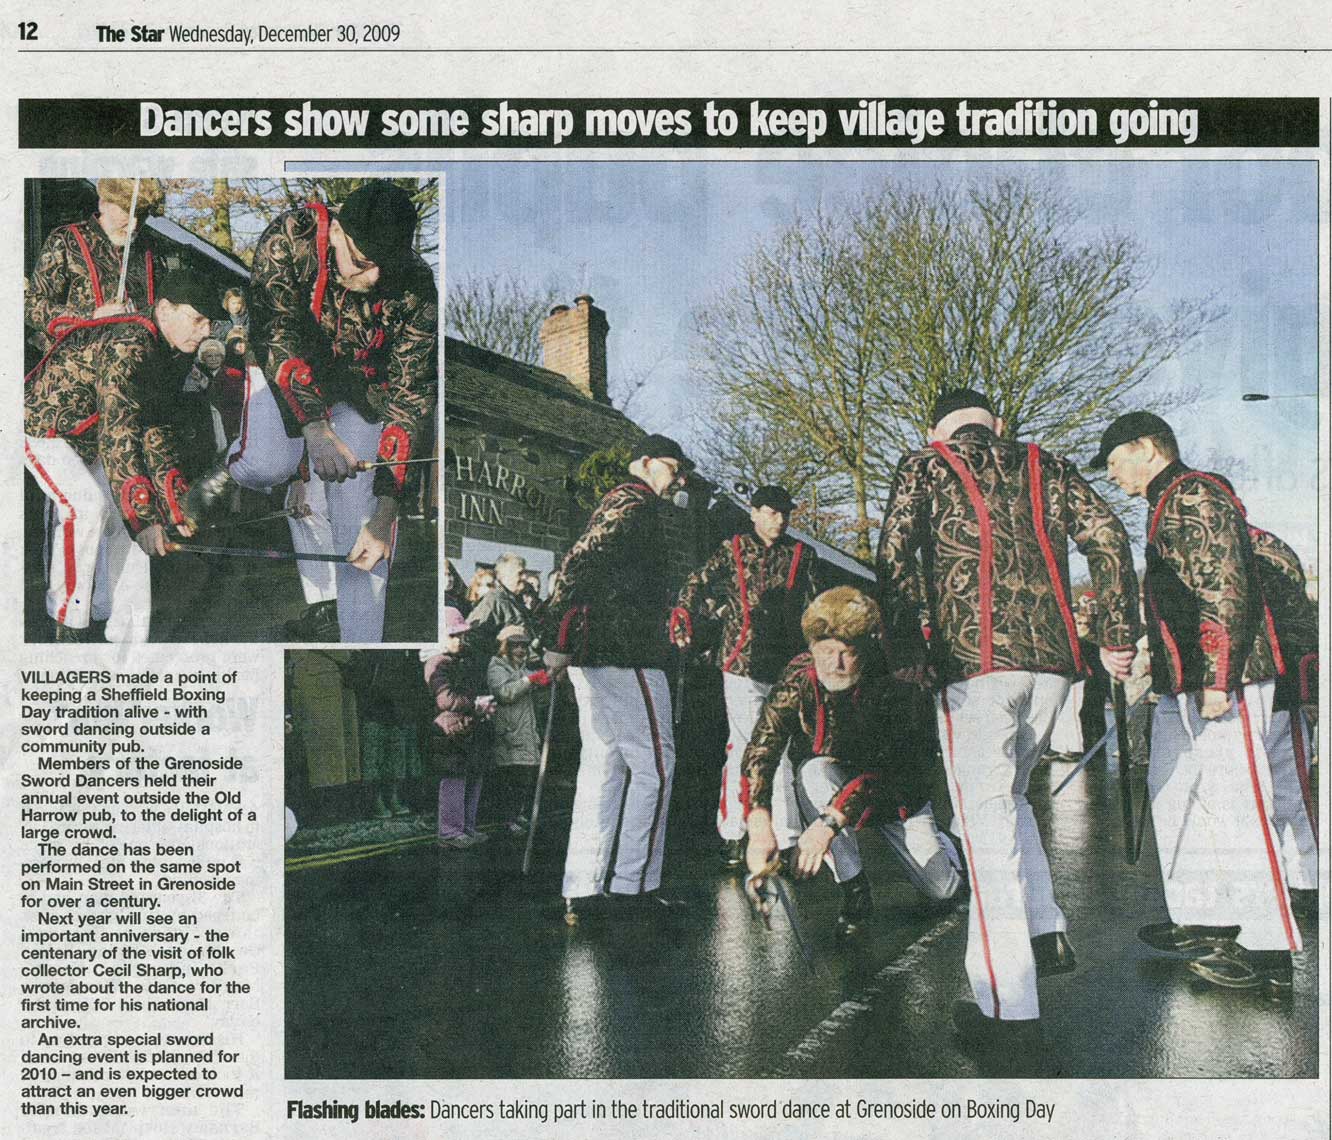 Flashing Blades: Dancers taking part in the traditional sword dance at Grenoside on Boxing Day